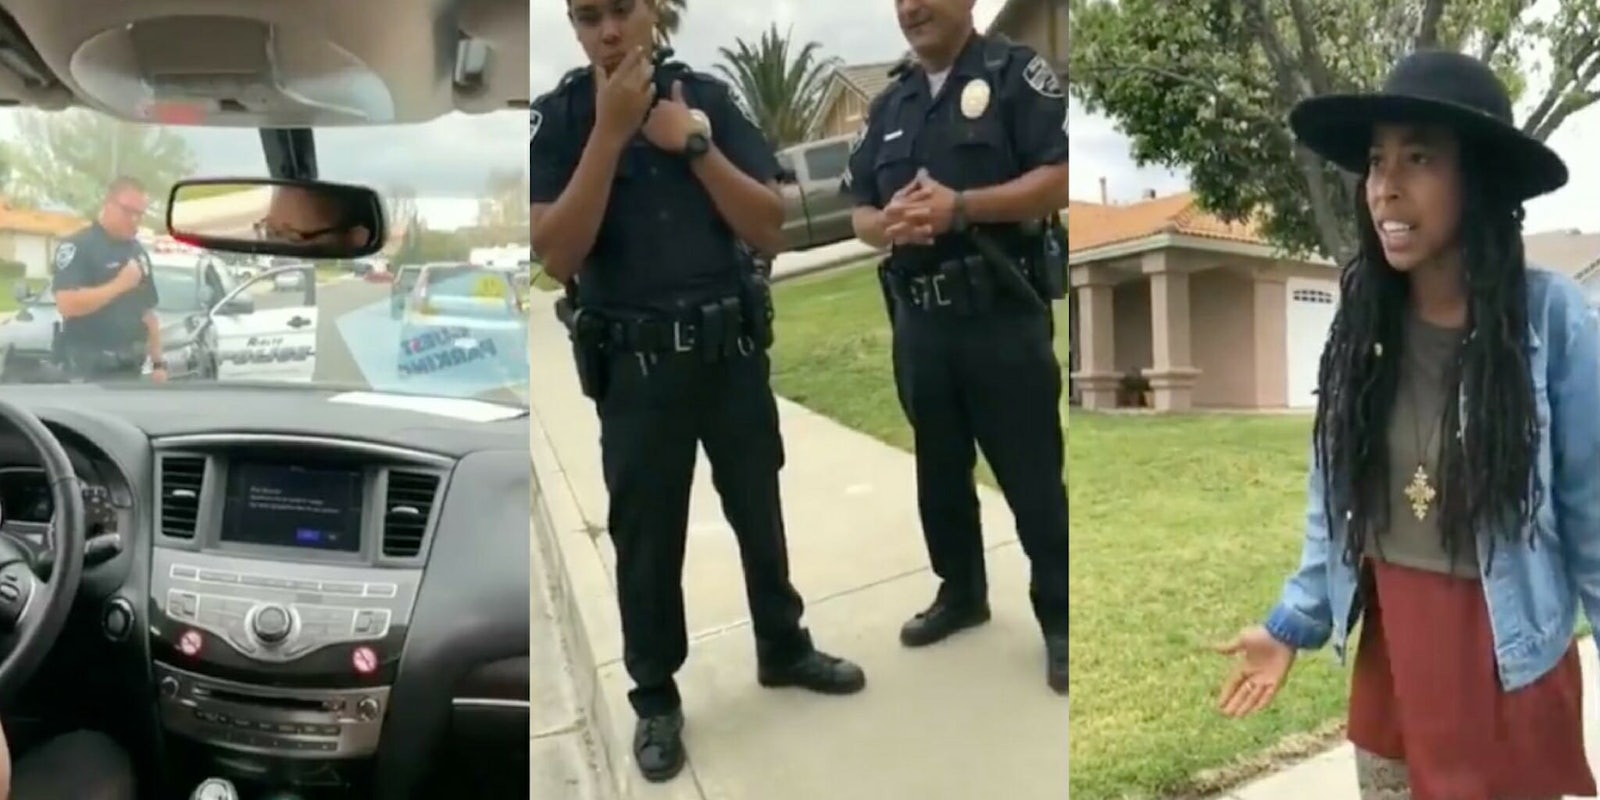 Cops are called to Black Airbnb guests leaving their home with their luggage because a neighbor suspected they were robbing the place.